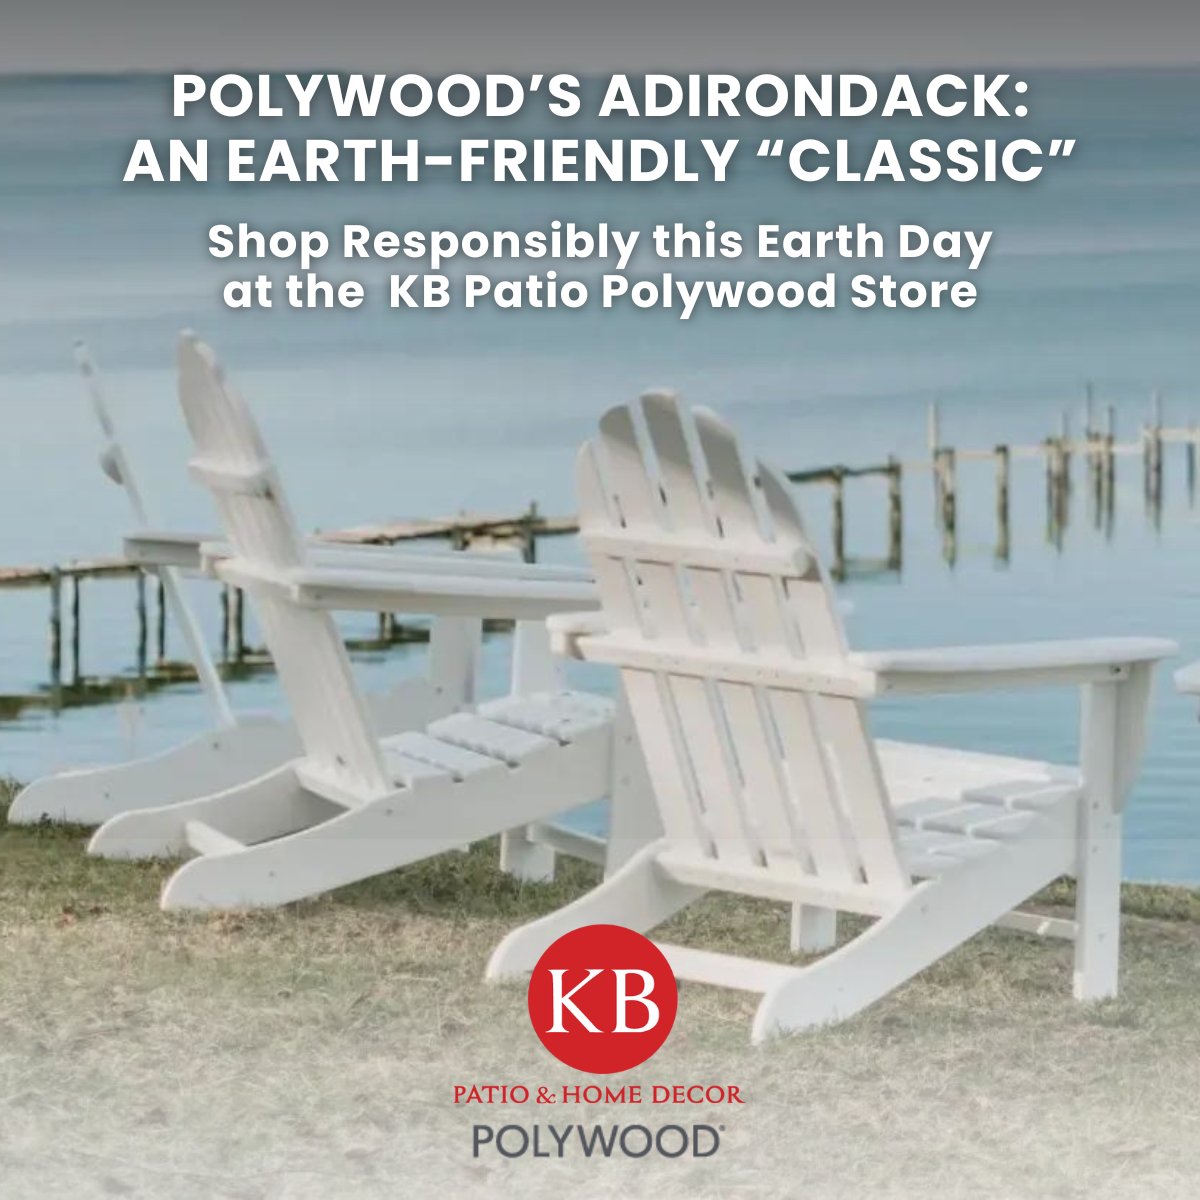 An Earth Day “feel good” purchase: choose a USA-made American  classic, made with 100% recycled materials at the nation’s best prices. It’s a win-win-win! b.link/kbp-pwood-24-04 
#polywoodstore #kbpatio #earthday